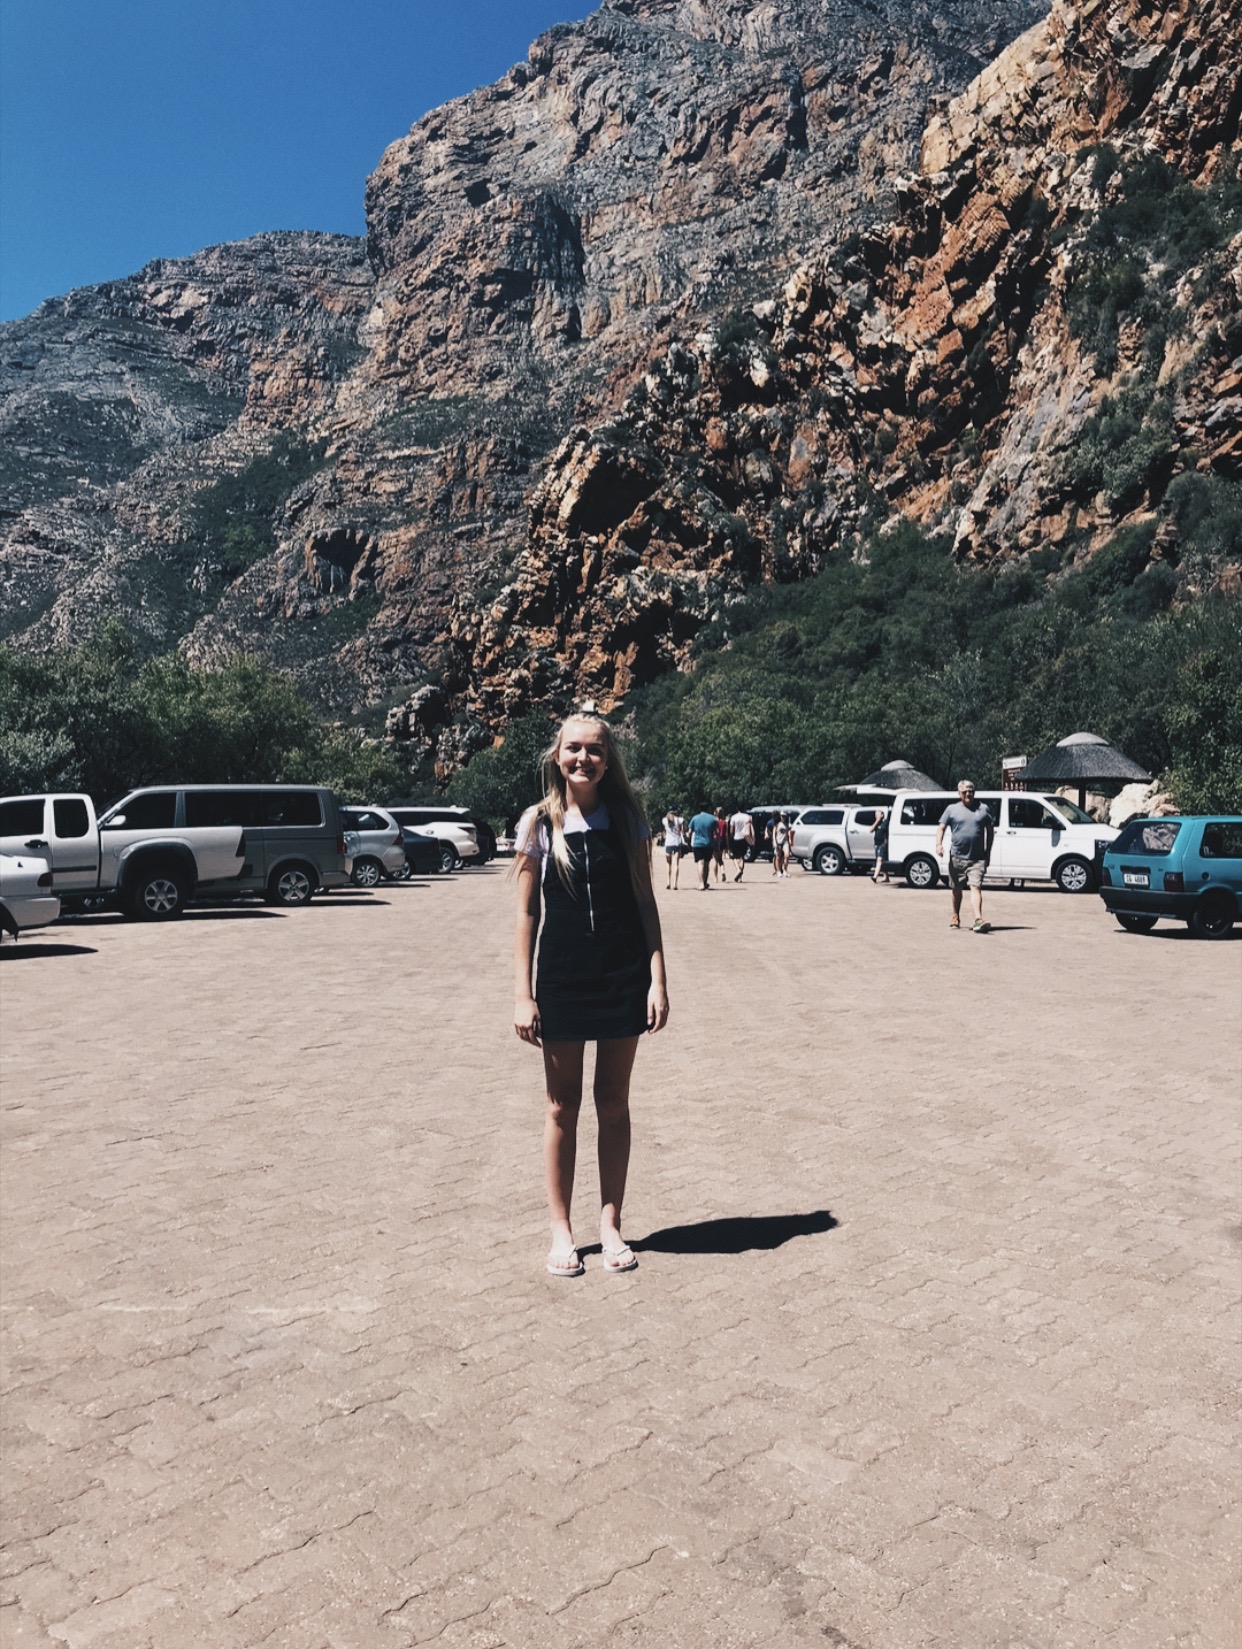 RESESS intern Courteney Pike stands in the parking lot of Meiringspoort Pass in the Western Cape province in South Africa with huge rock outcrops visible in the background.